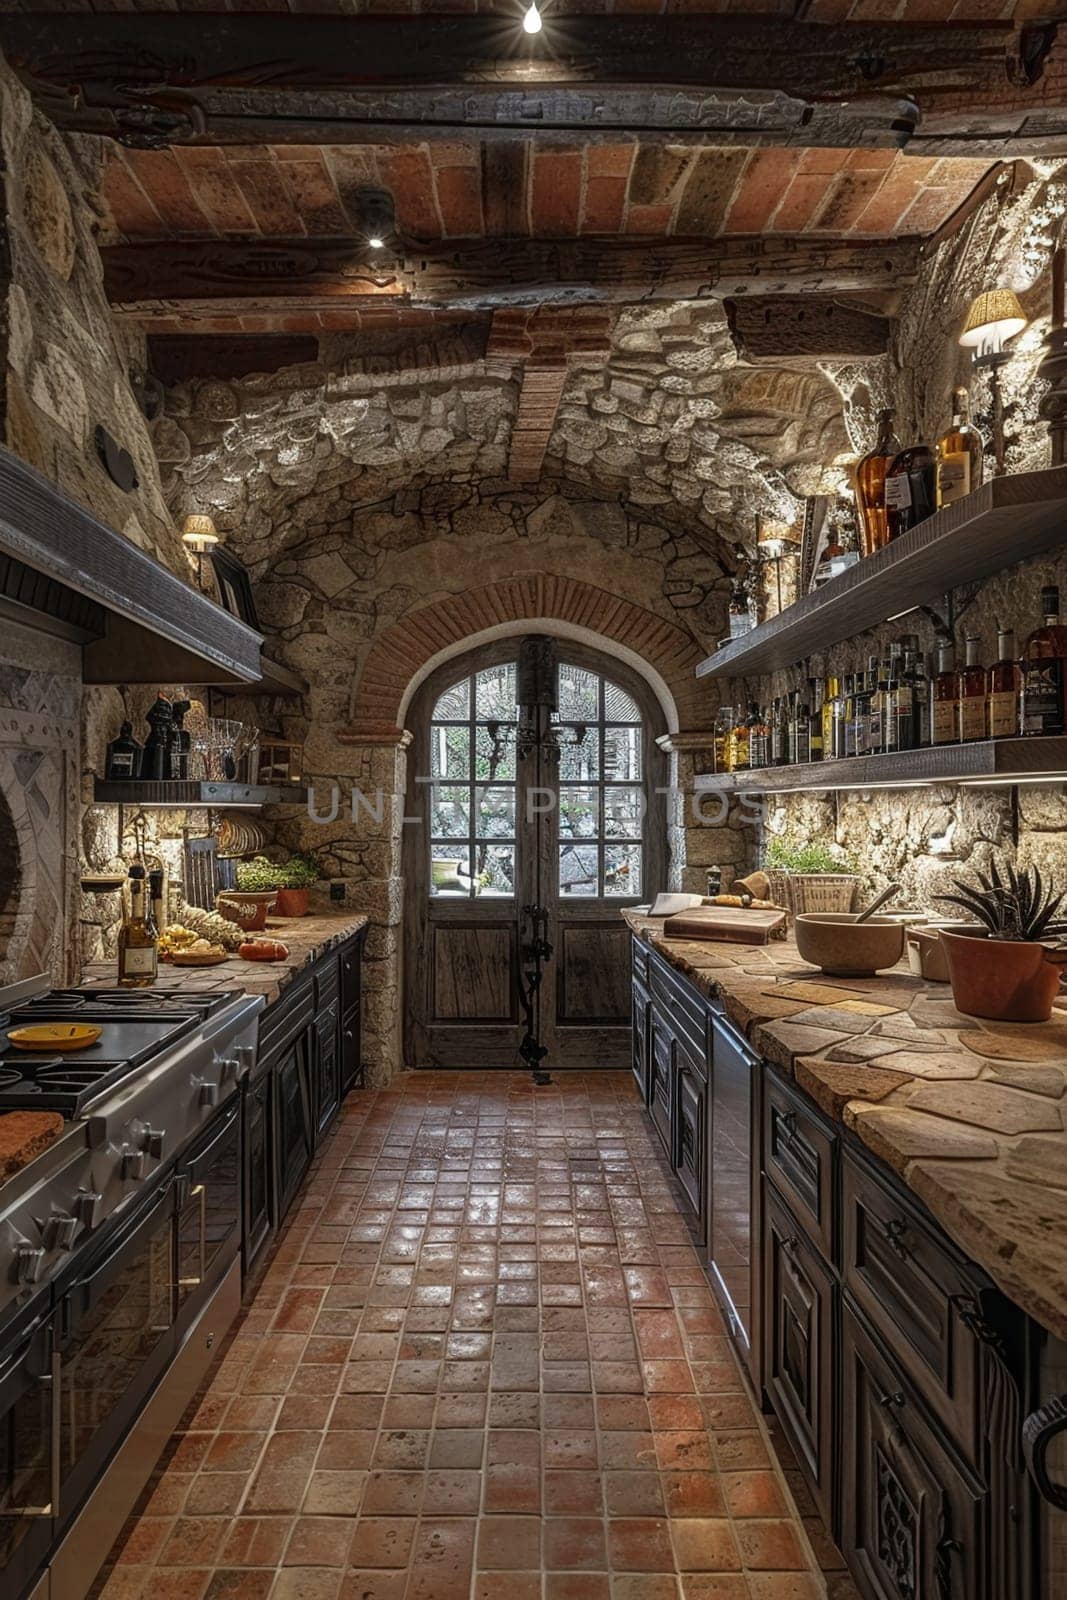 Italian villa kitchen with terracotta tiles and a rustic stone ovenHyperrealistic